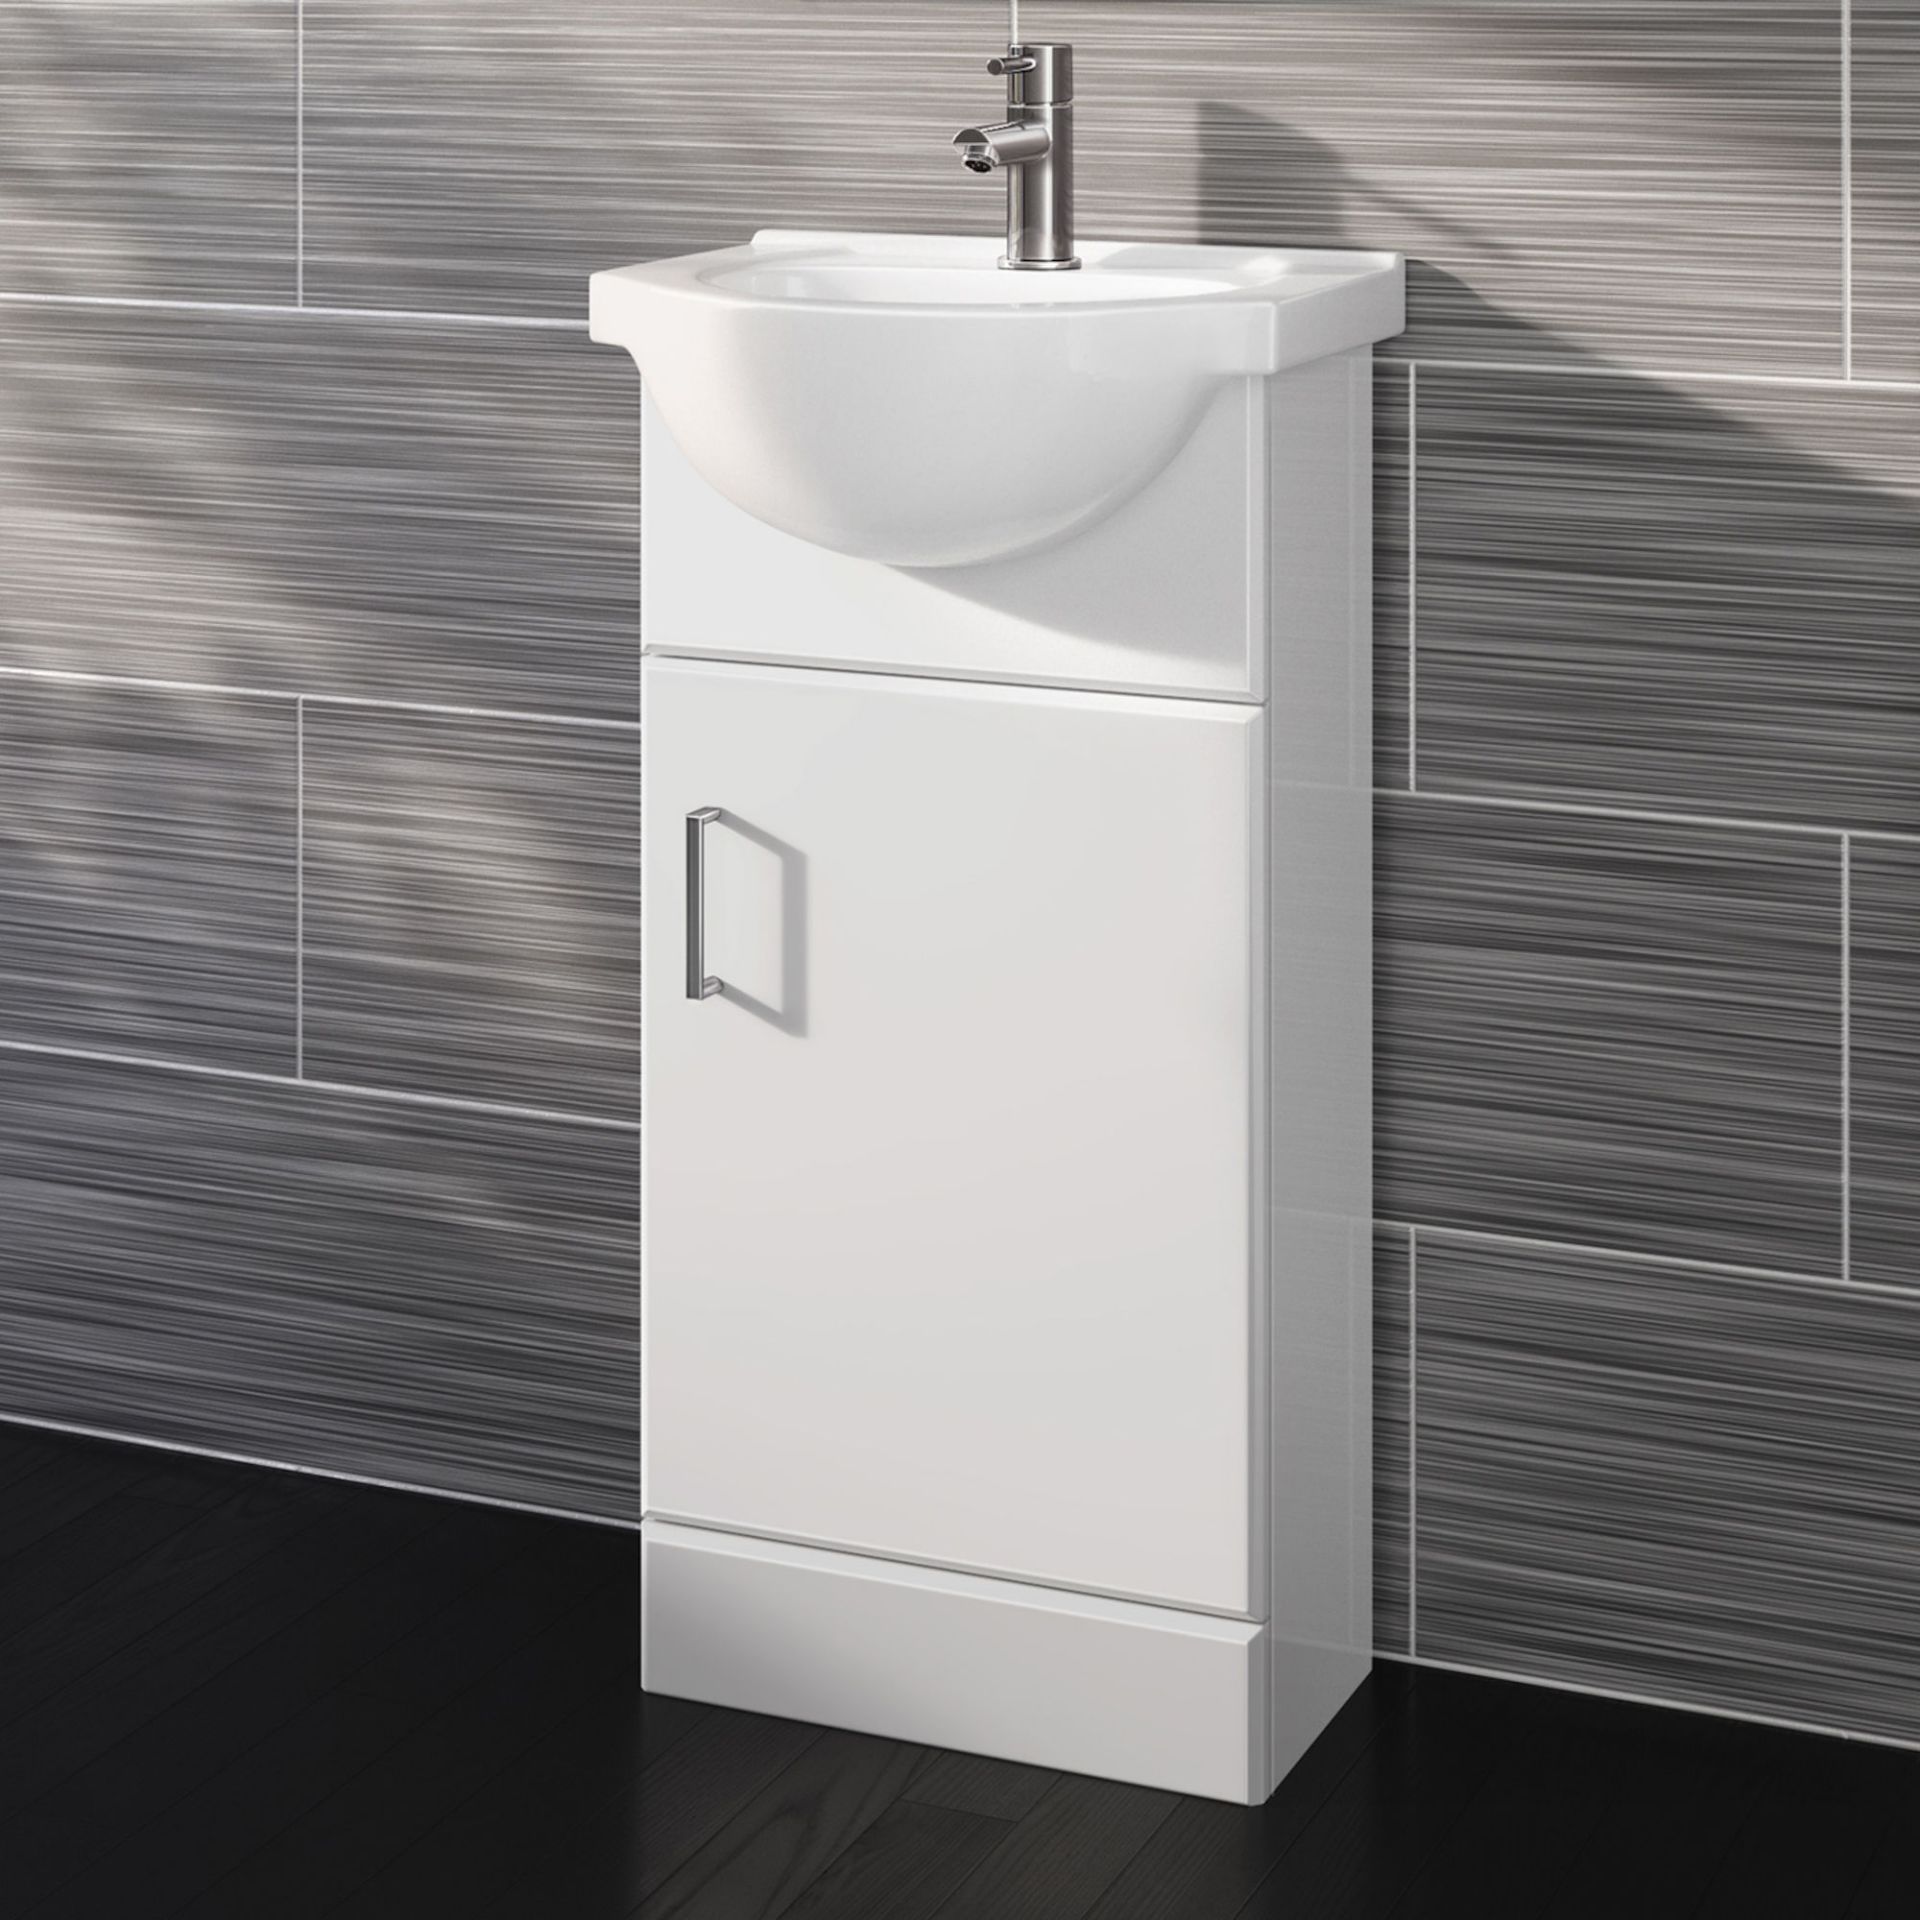 (VN31) 410mm Quartz Gloss White Built In Basin Cabinet. RRP £199.99. Comes complete with basin.